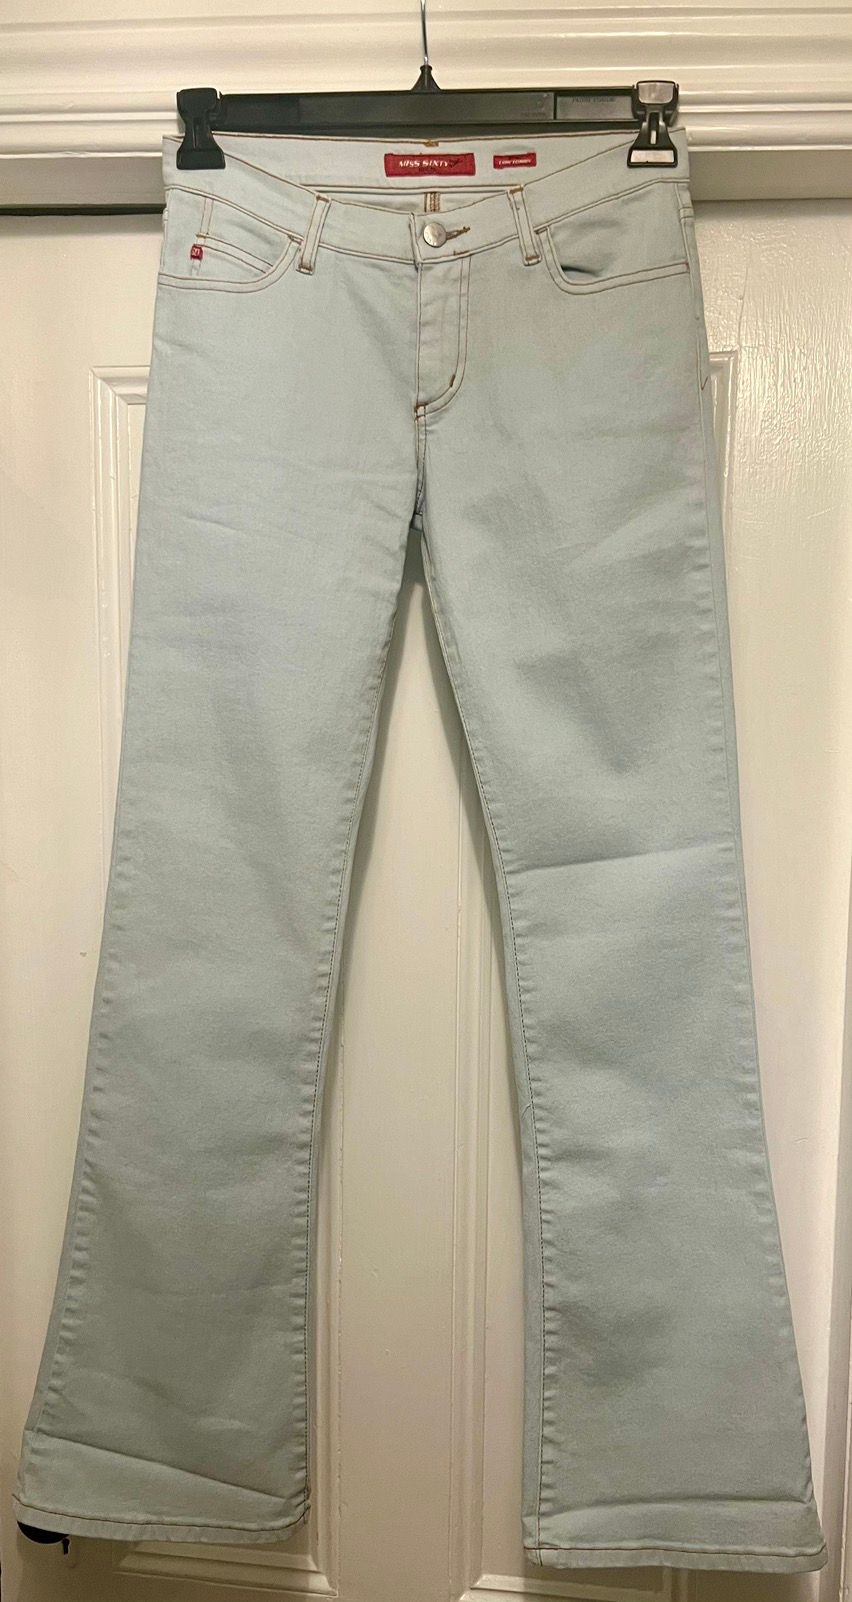 Designer Authentic Miss Sixty Made In Italy Jeans 30 Light Wash Denim Size 30" / US 8 / IT 44 - 1 Preview